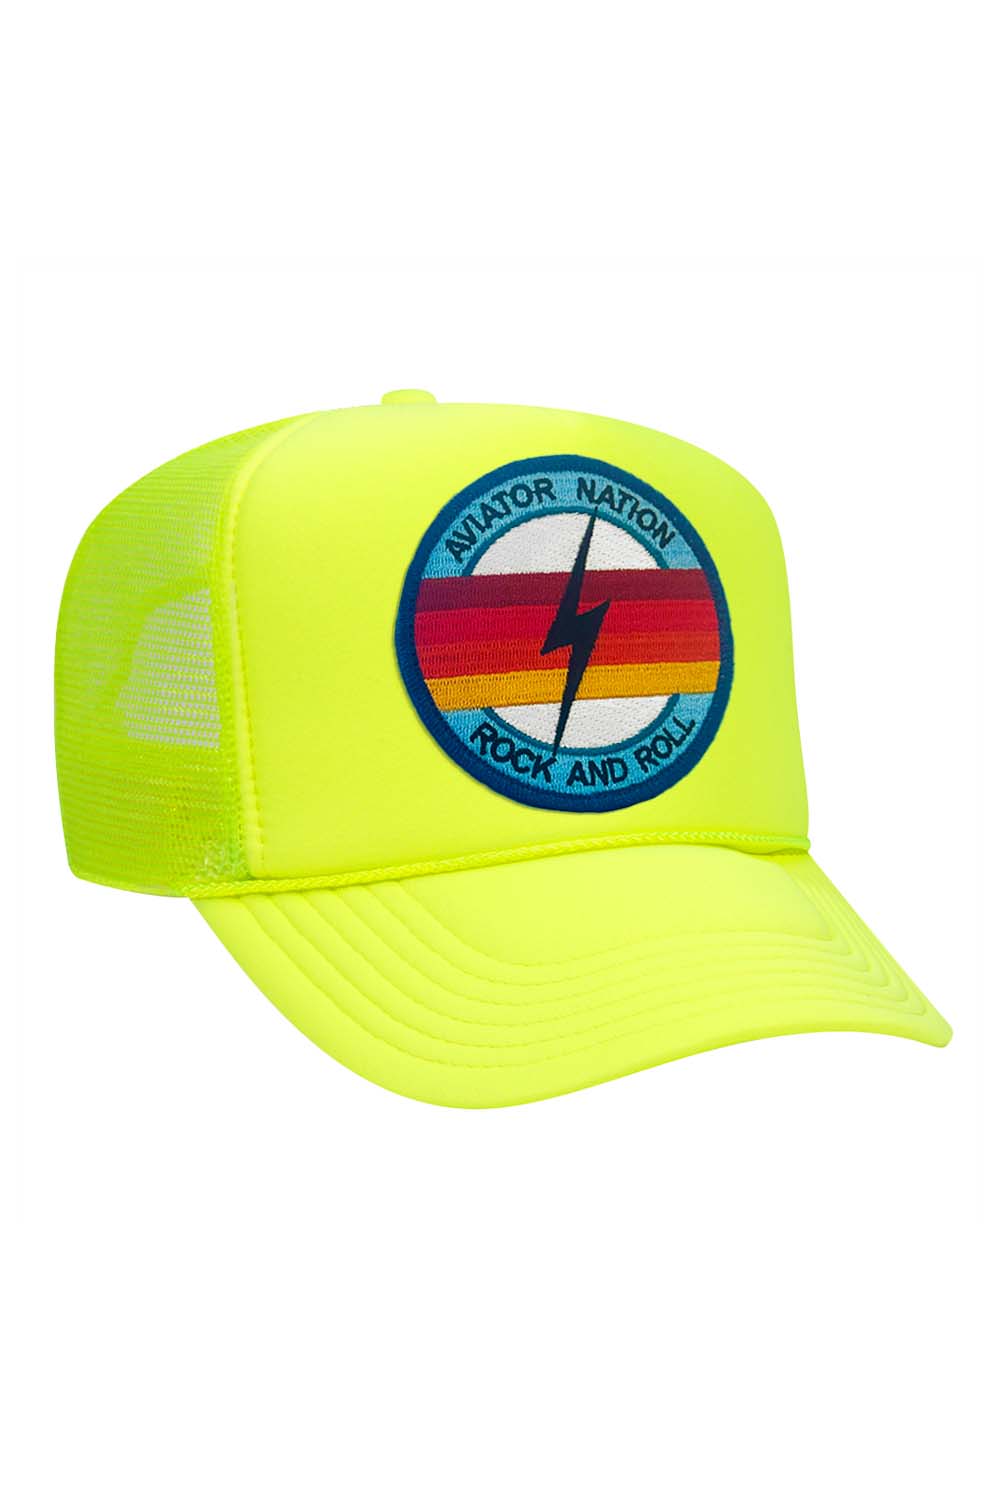 ROCK AND ROLL BOLT VINTAGE TRUCKER HAT HATS Aviator Nation NEON YELLOW 